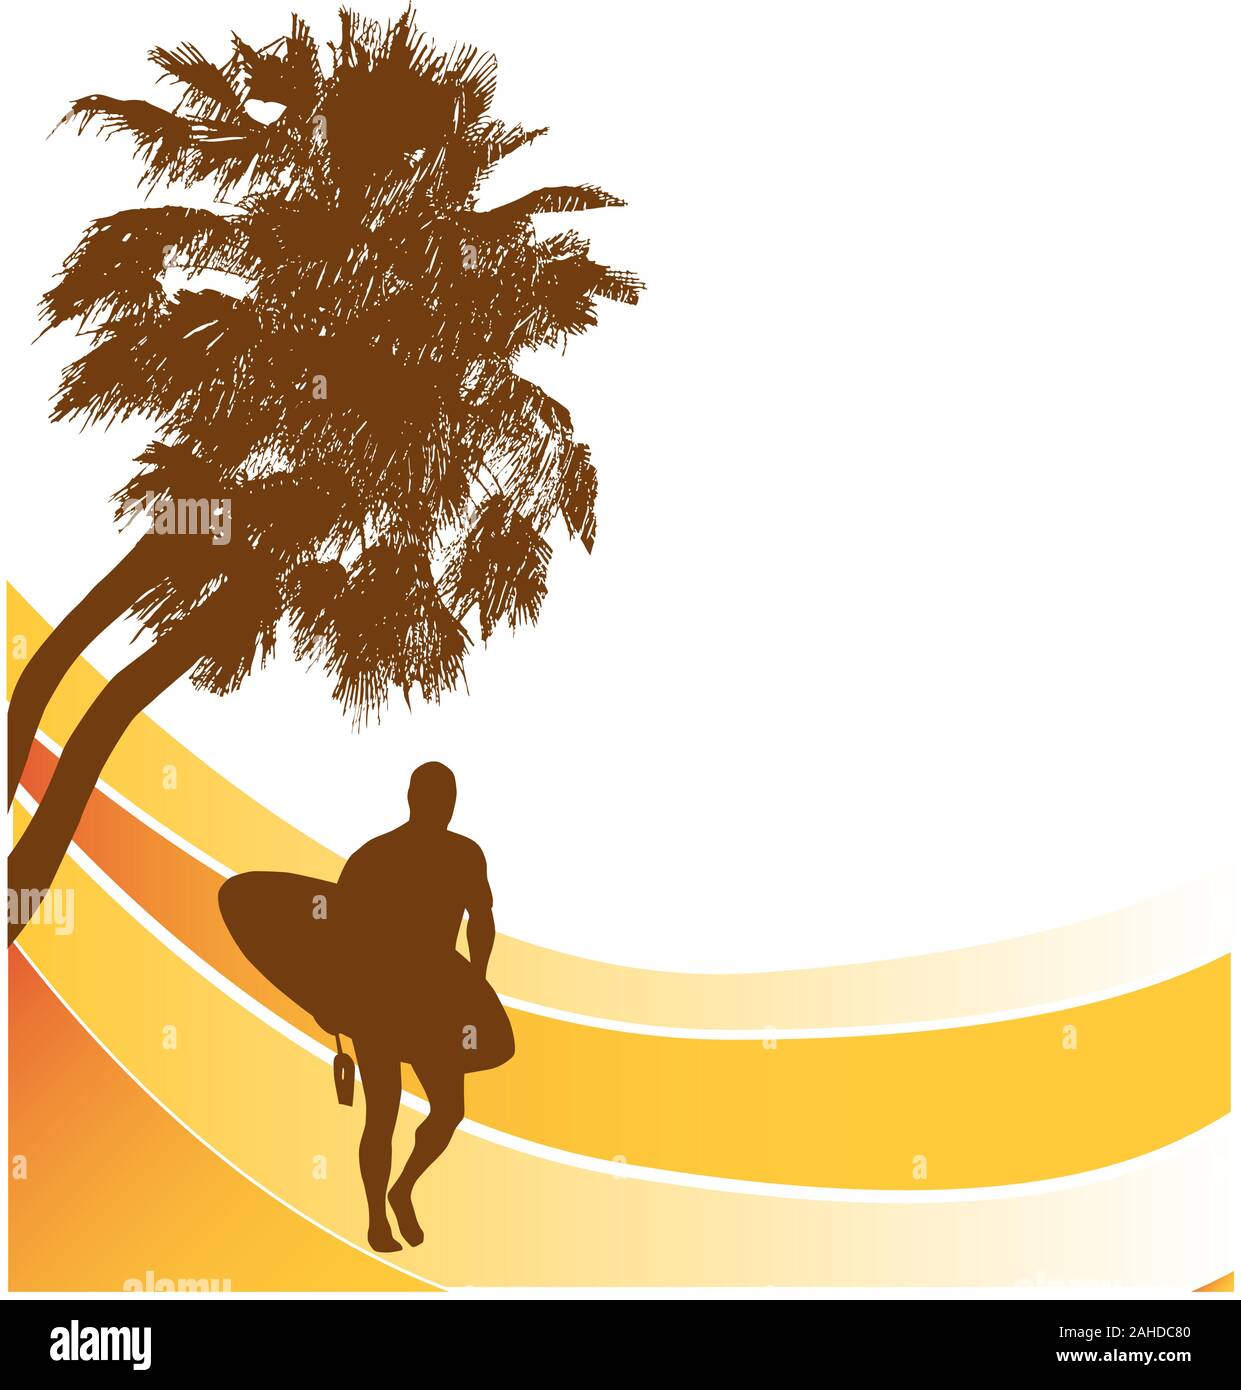 surfer banner highly detailed and easy to manipulate Stock Vector